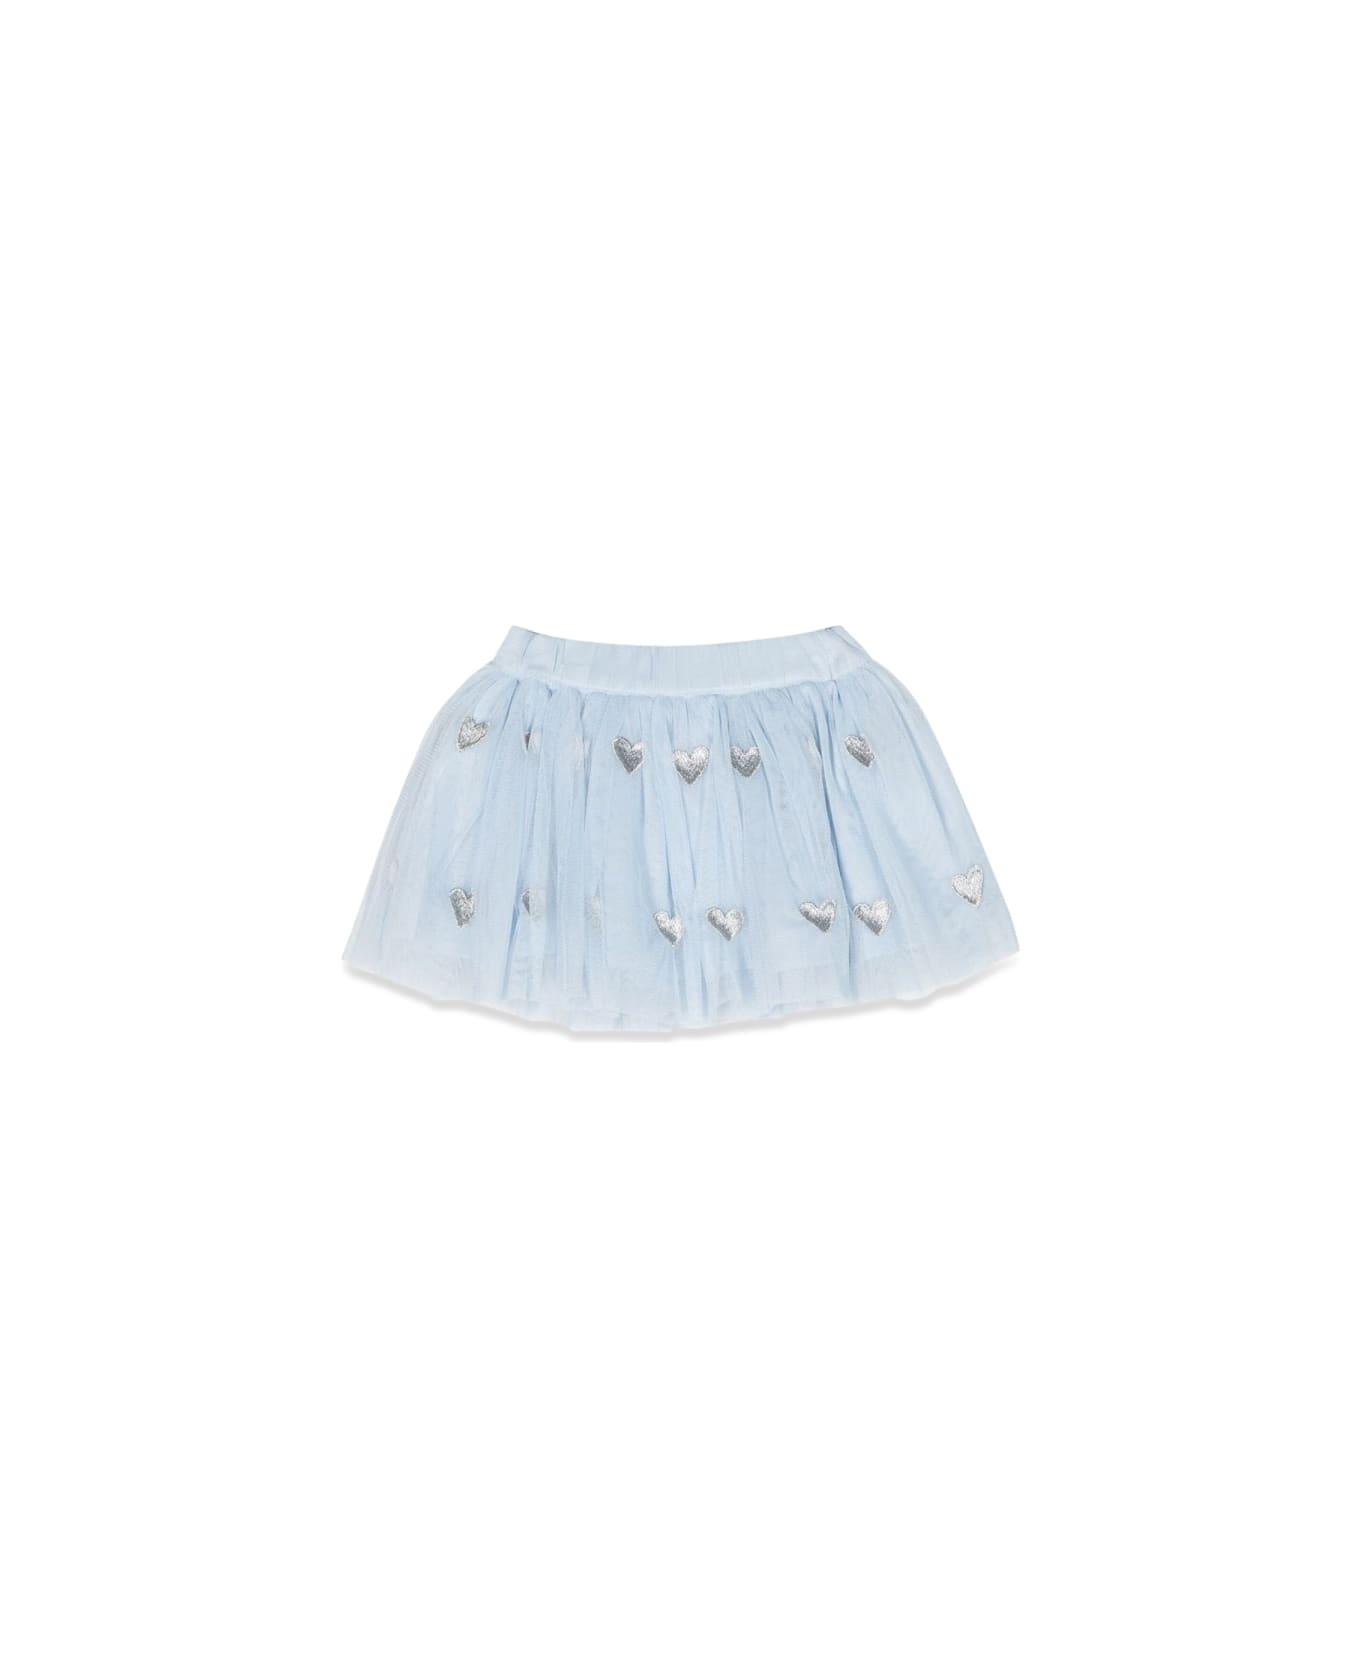 Stella McCartney Kids Skirt With Embroidery - BABY BLUE